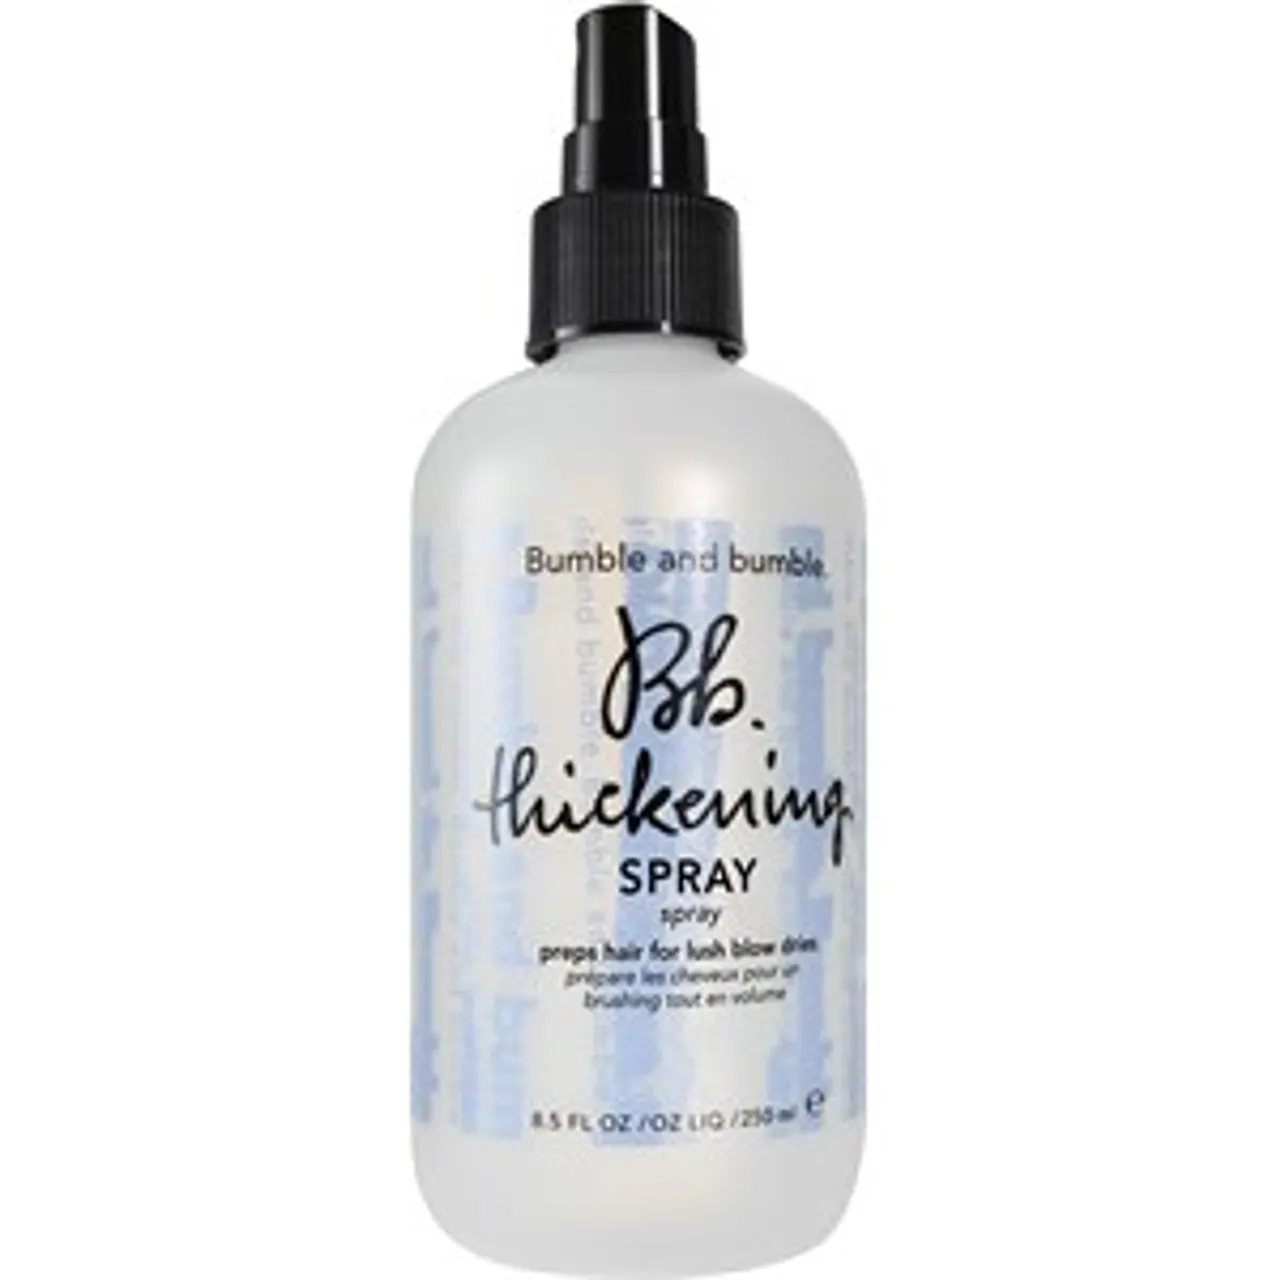 Bumble and bumble Thickening Spray Pre-Styler Female 60 ml